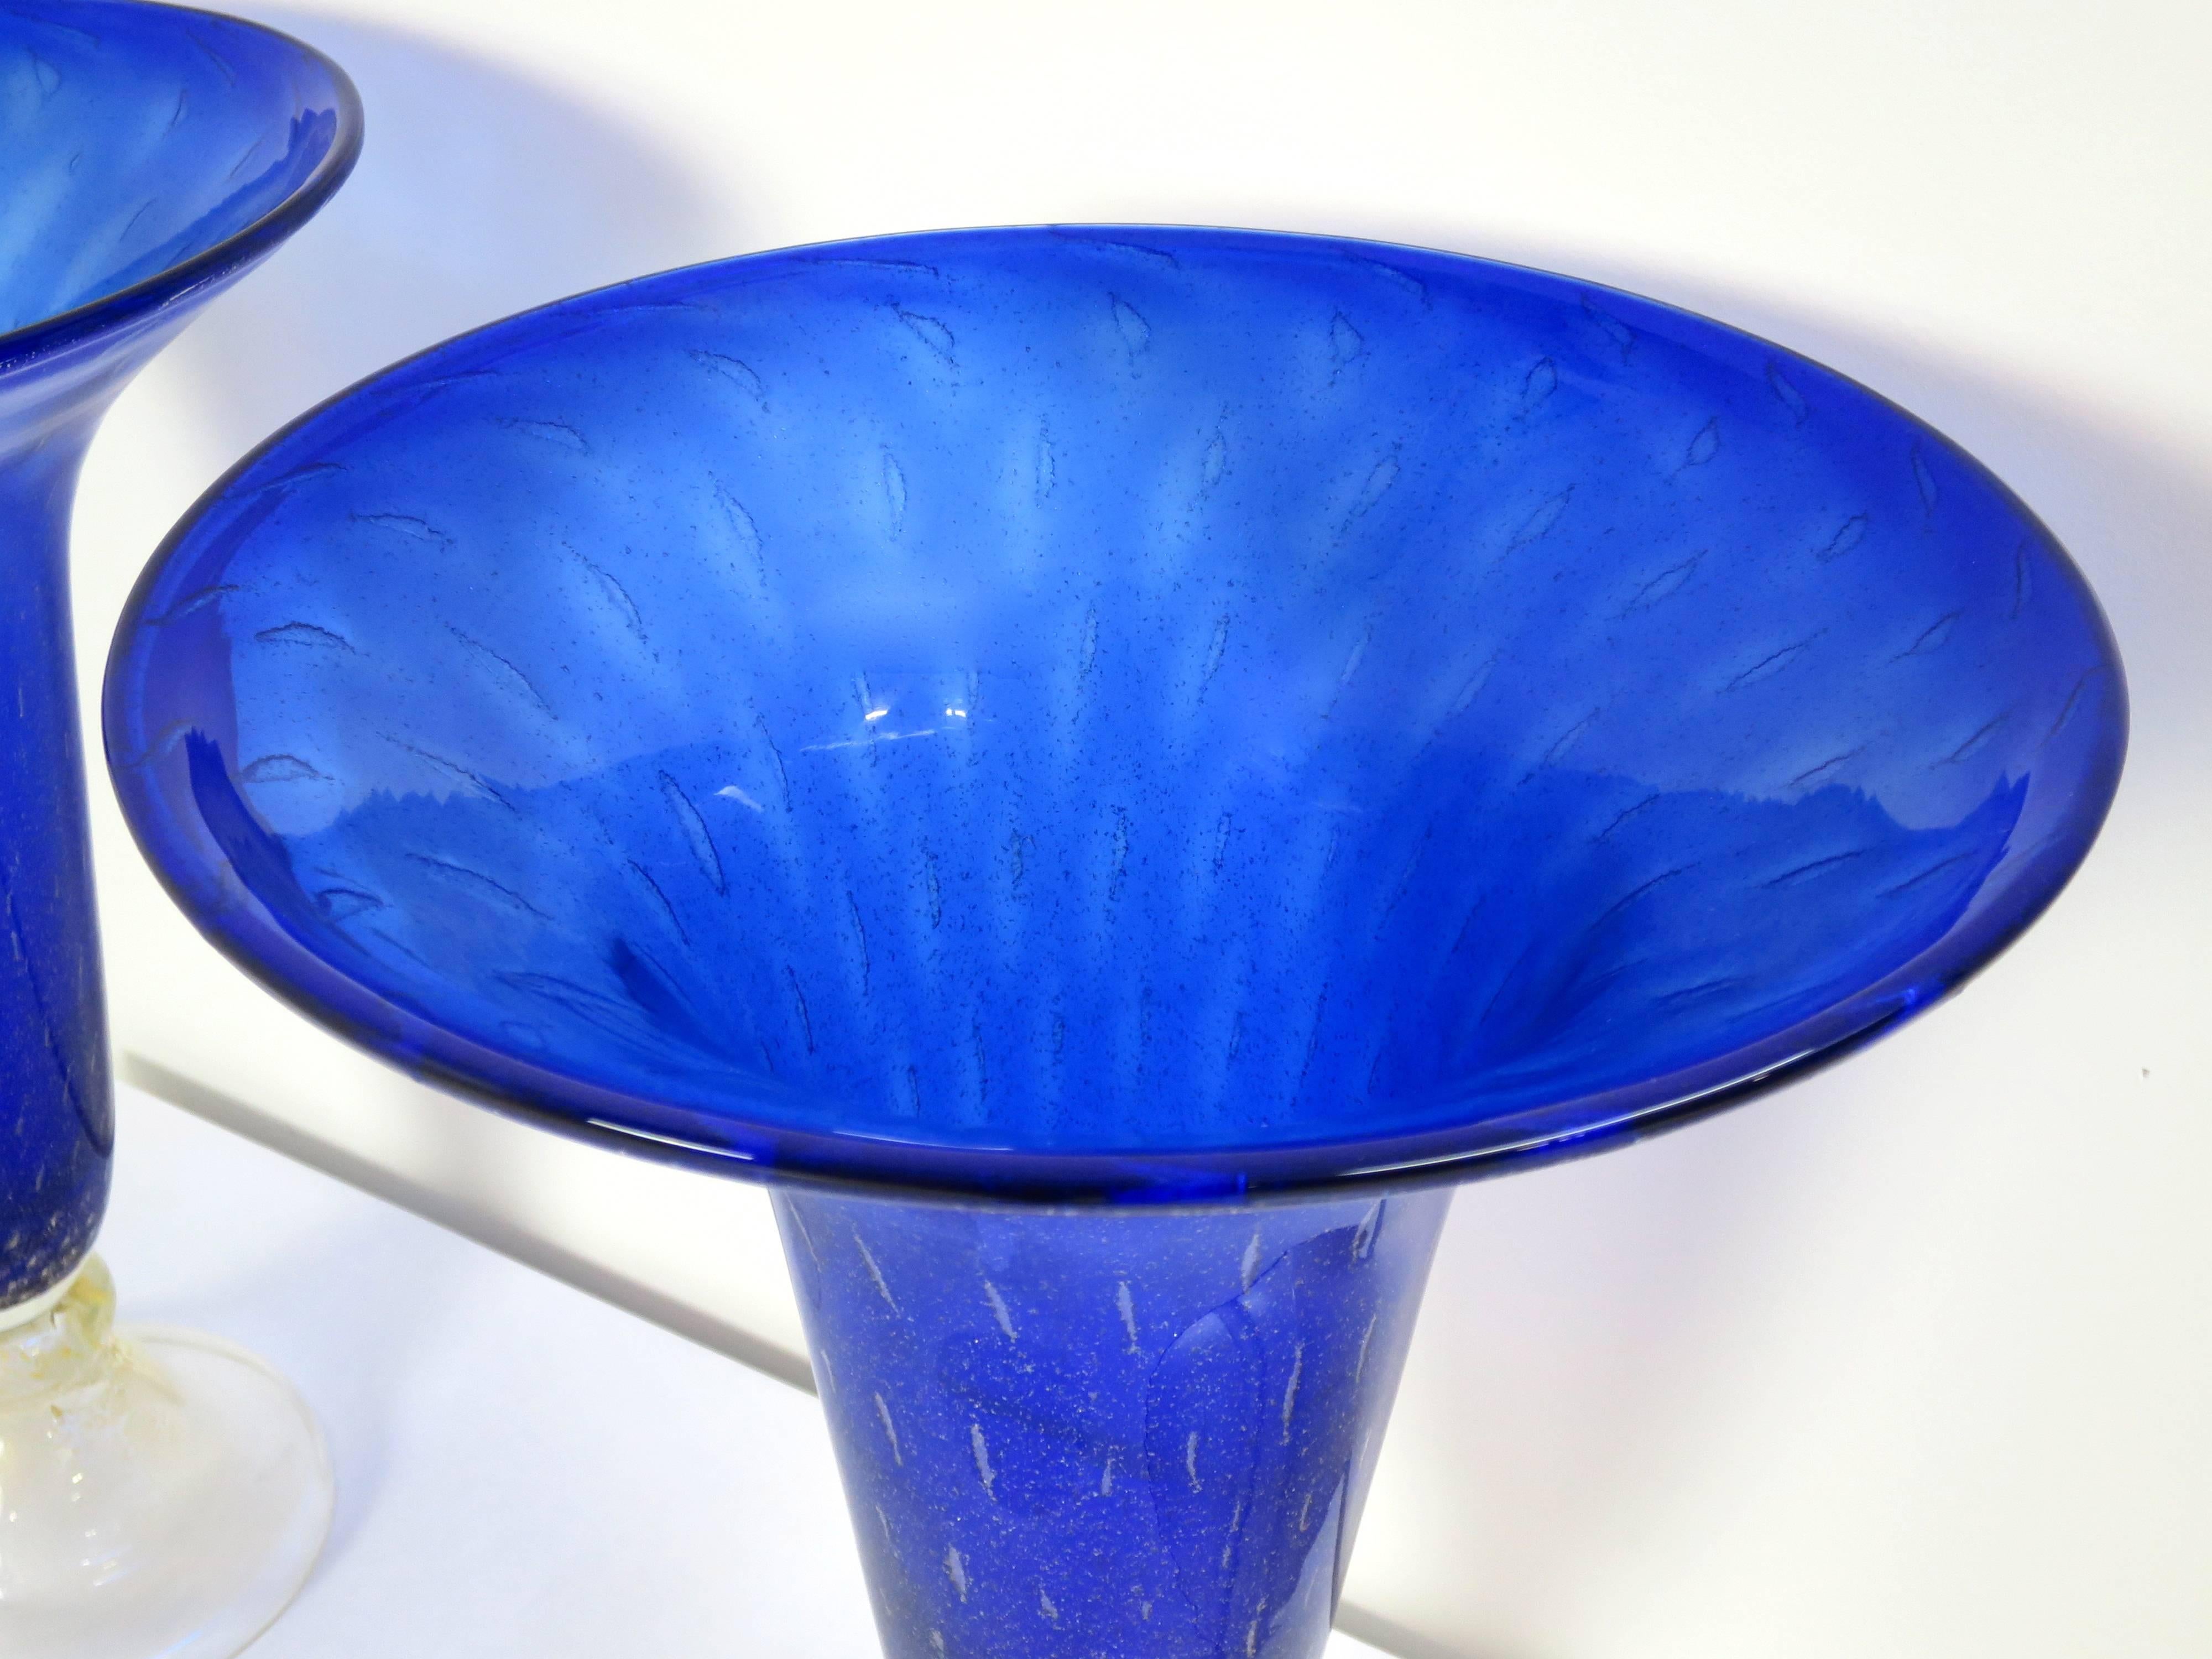 Exquisite Pair of Large Royal Blue Murano Glass Vases In Excellent Condition For Sale In San Diego, CA